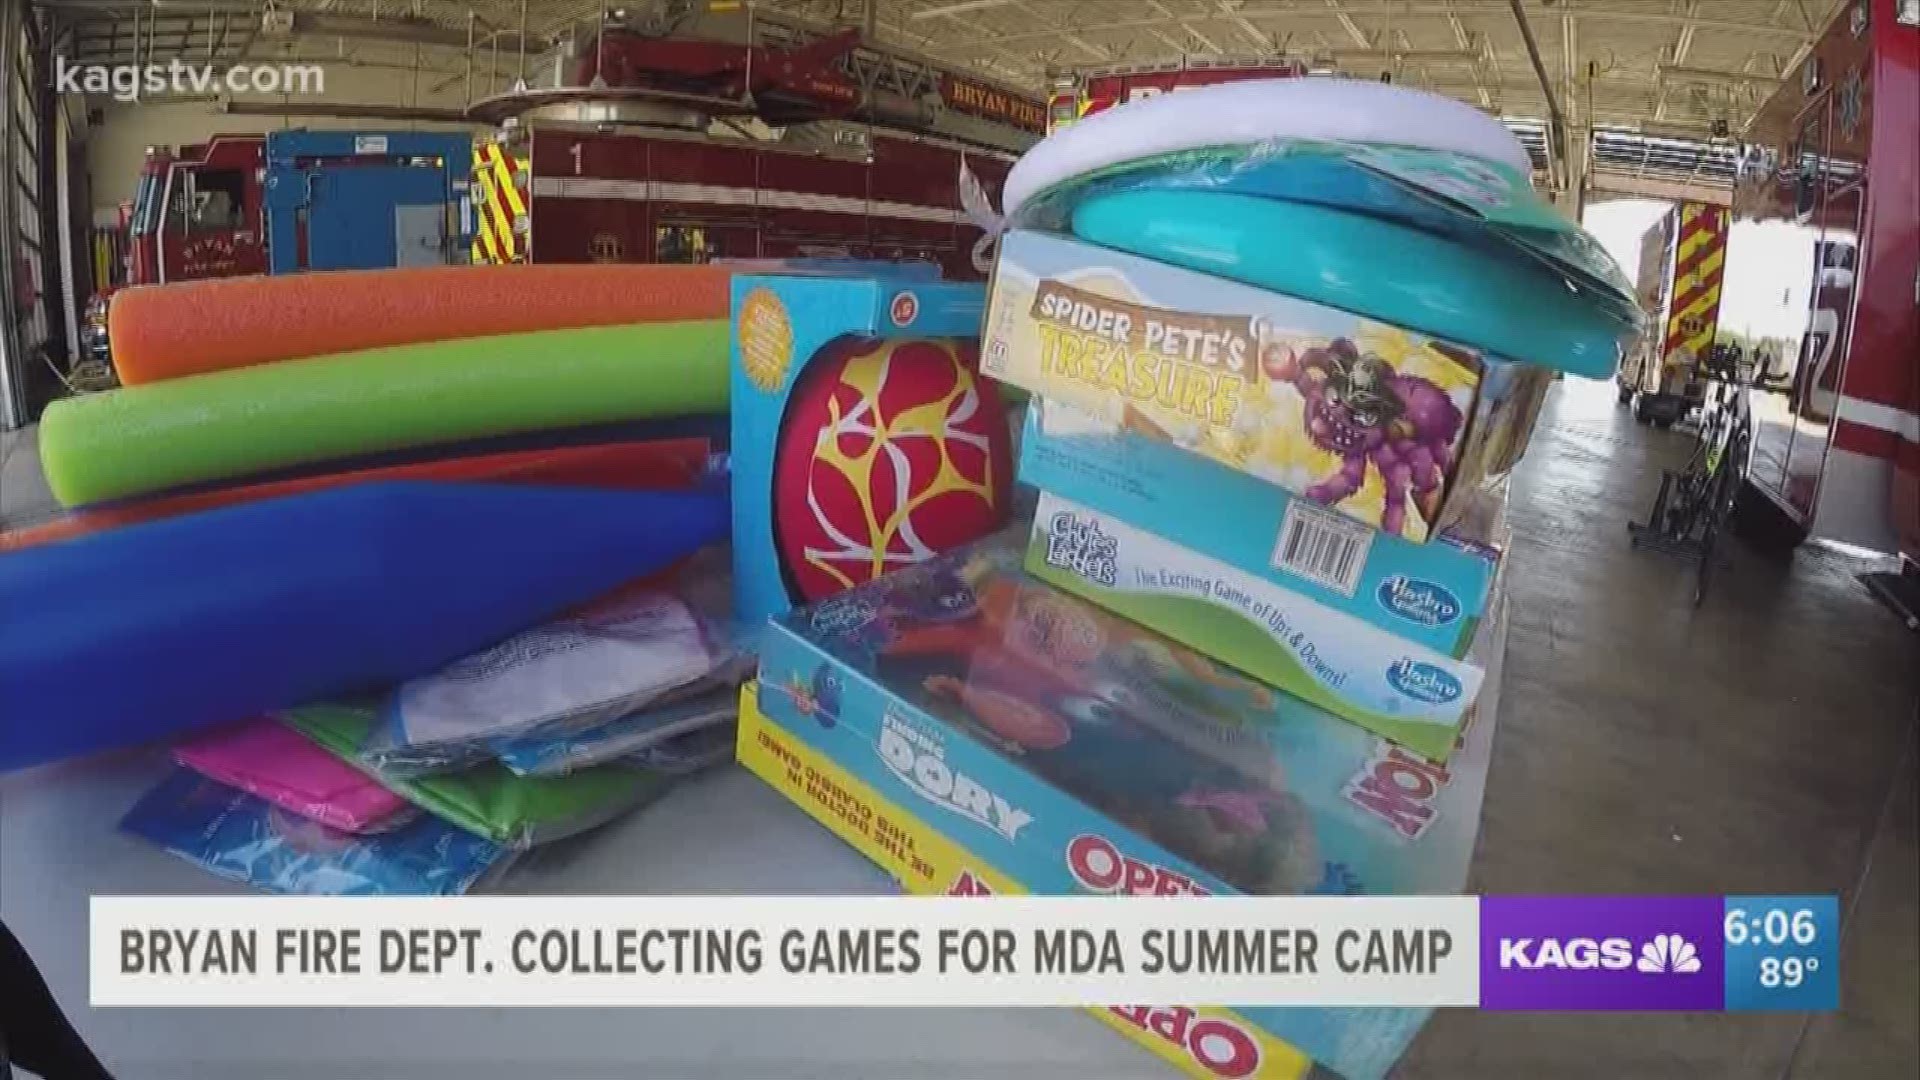 The Bryan Fire Department is holding a game drive where they will be collecting a variety of games to donate to the Camp For All summer camp that works with special needs children.